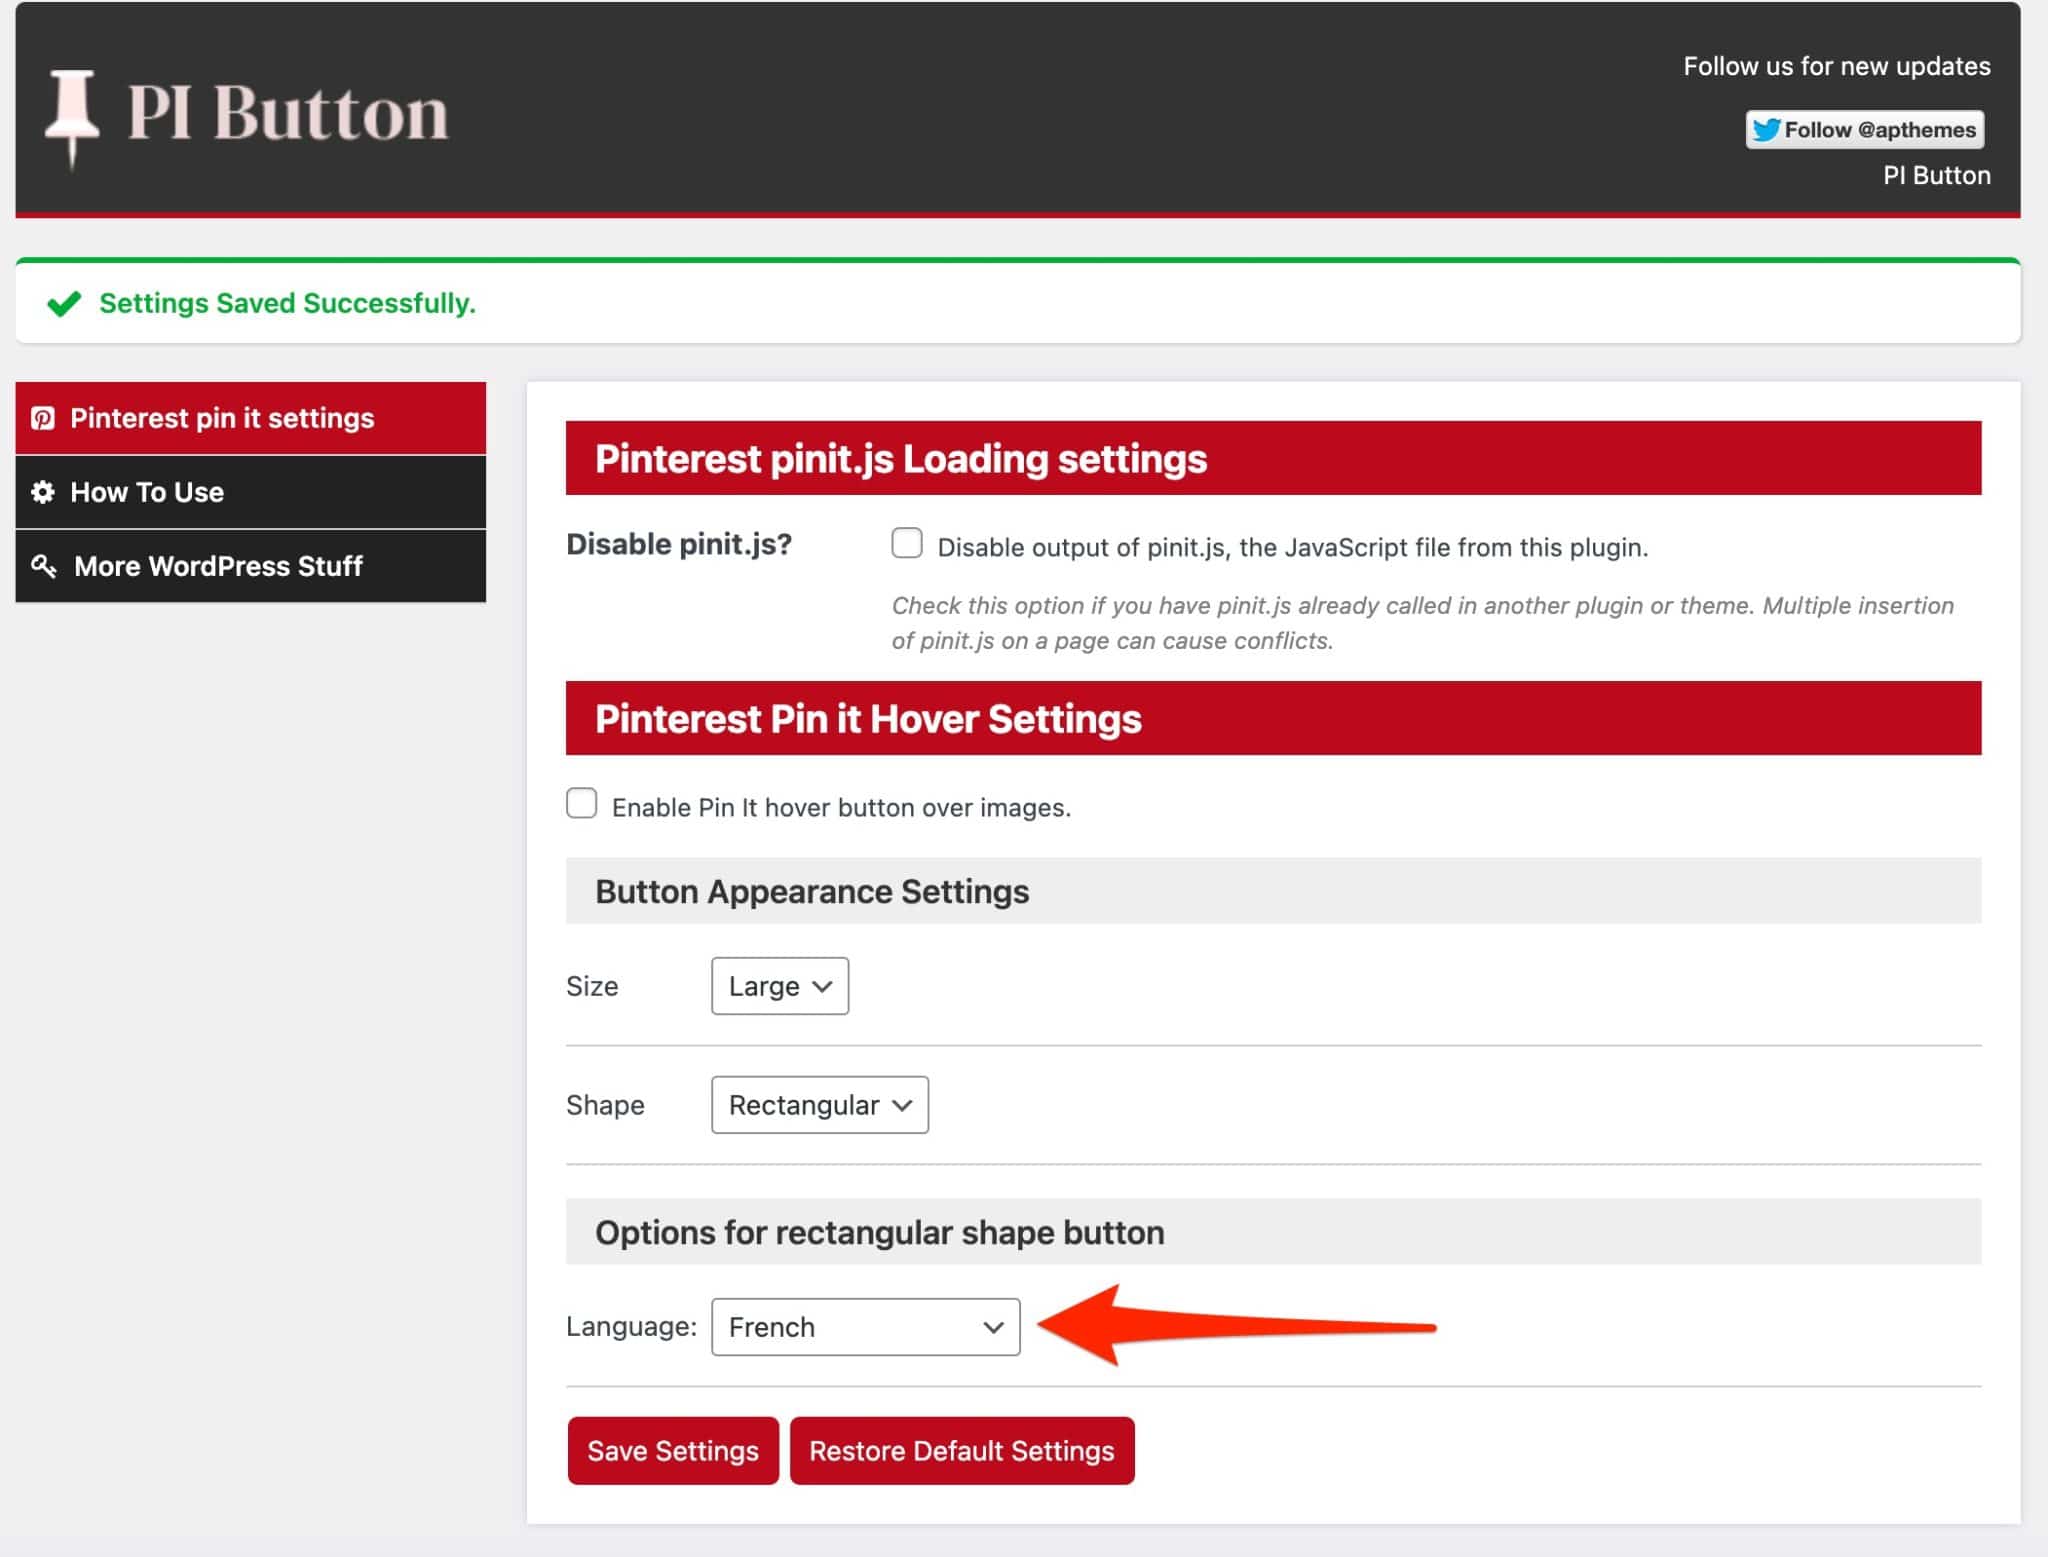 The Pinterest PI Button extension settings.